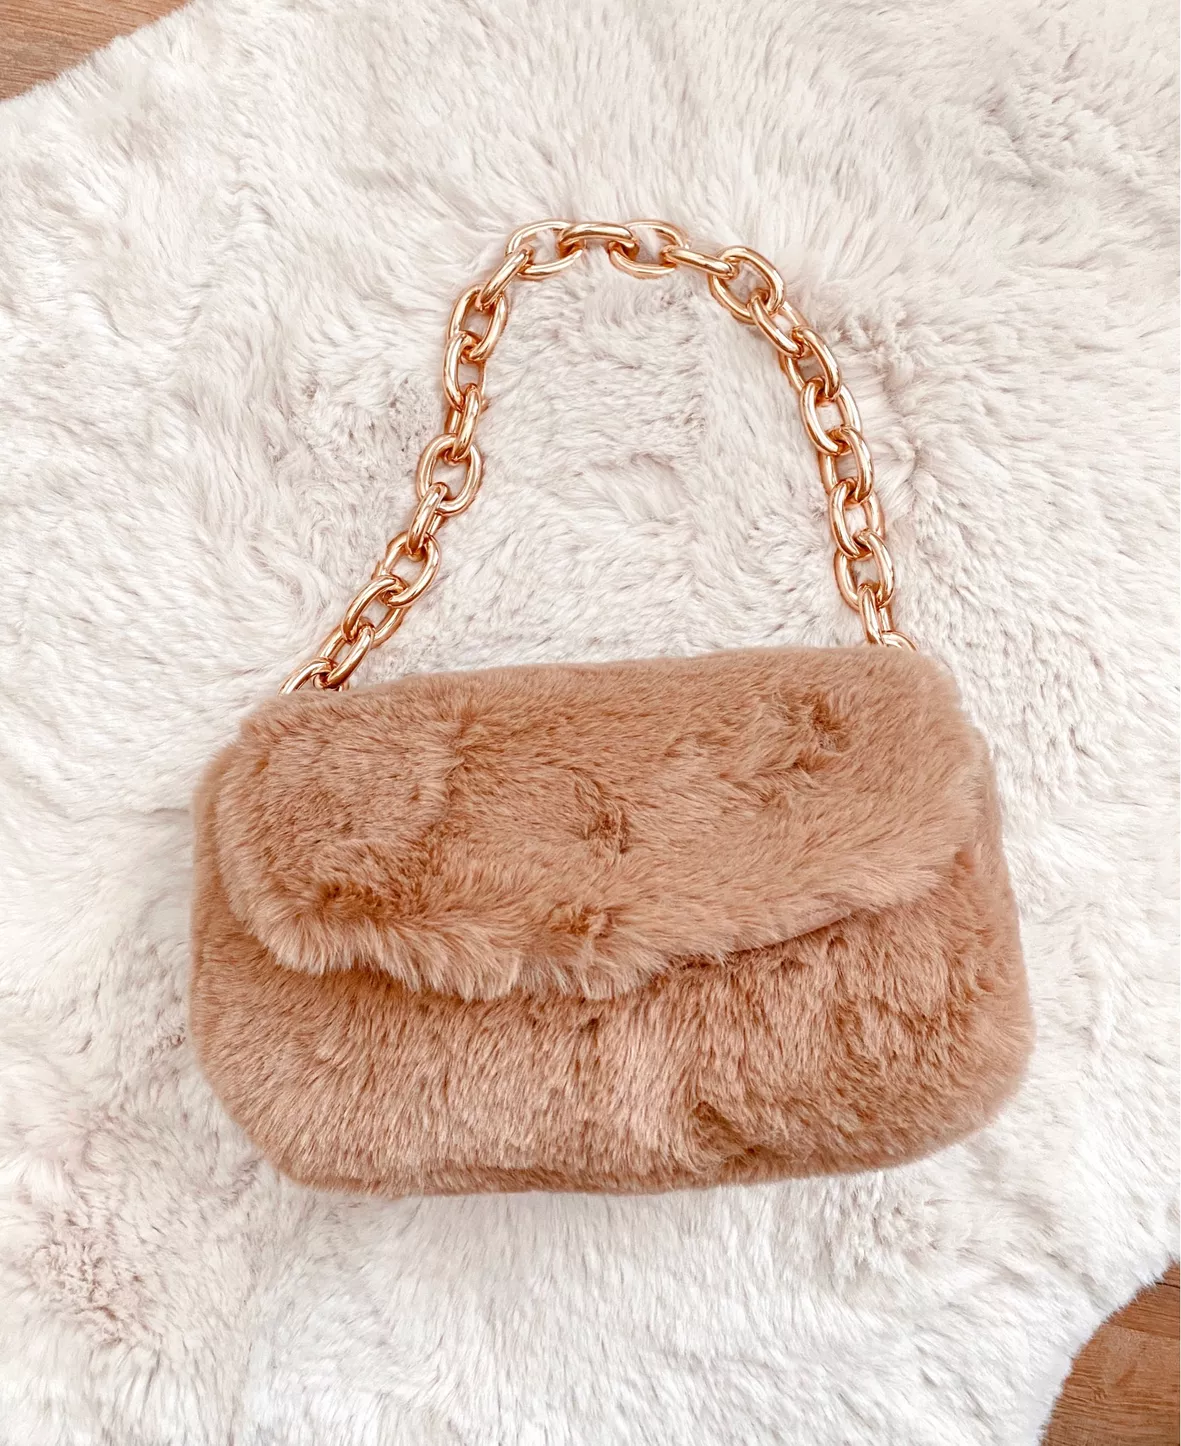 chanel dupes dhgate